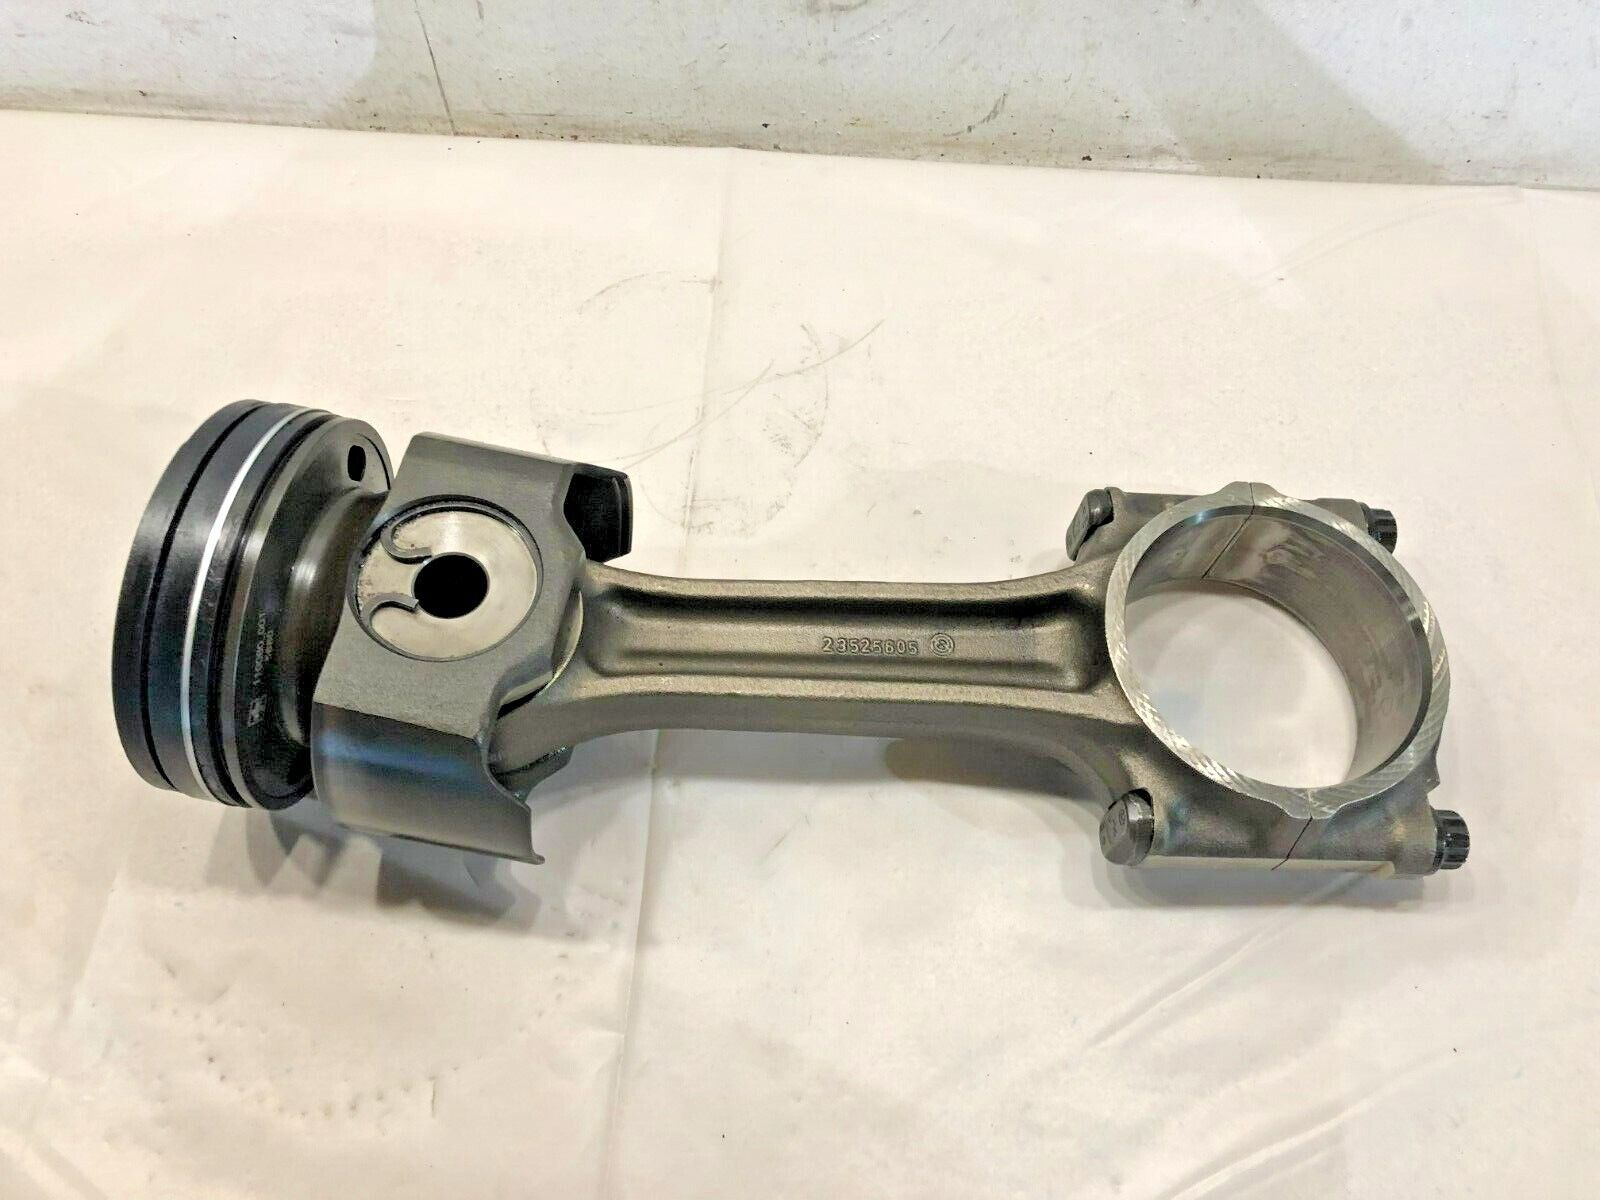 Primary image for DETROIT DIESEL 60 SERIES 14.0L ENGINE CAST PISTON & CONNECTING ROD 23525605 OEM